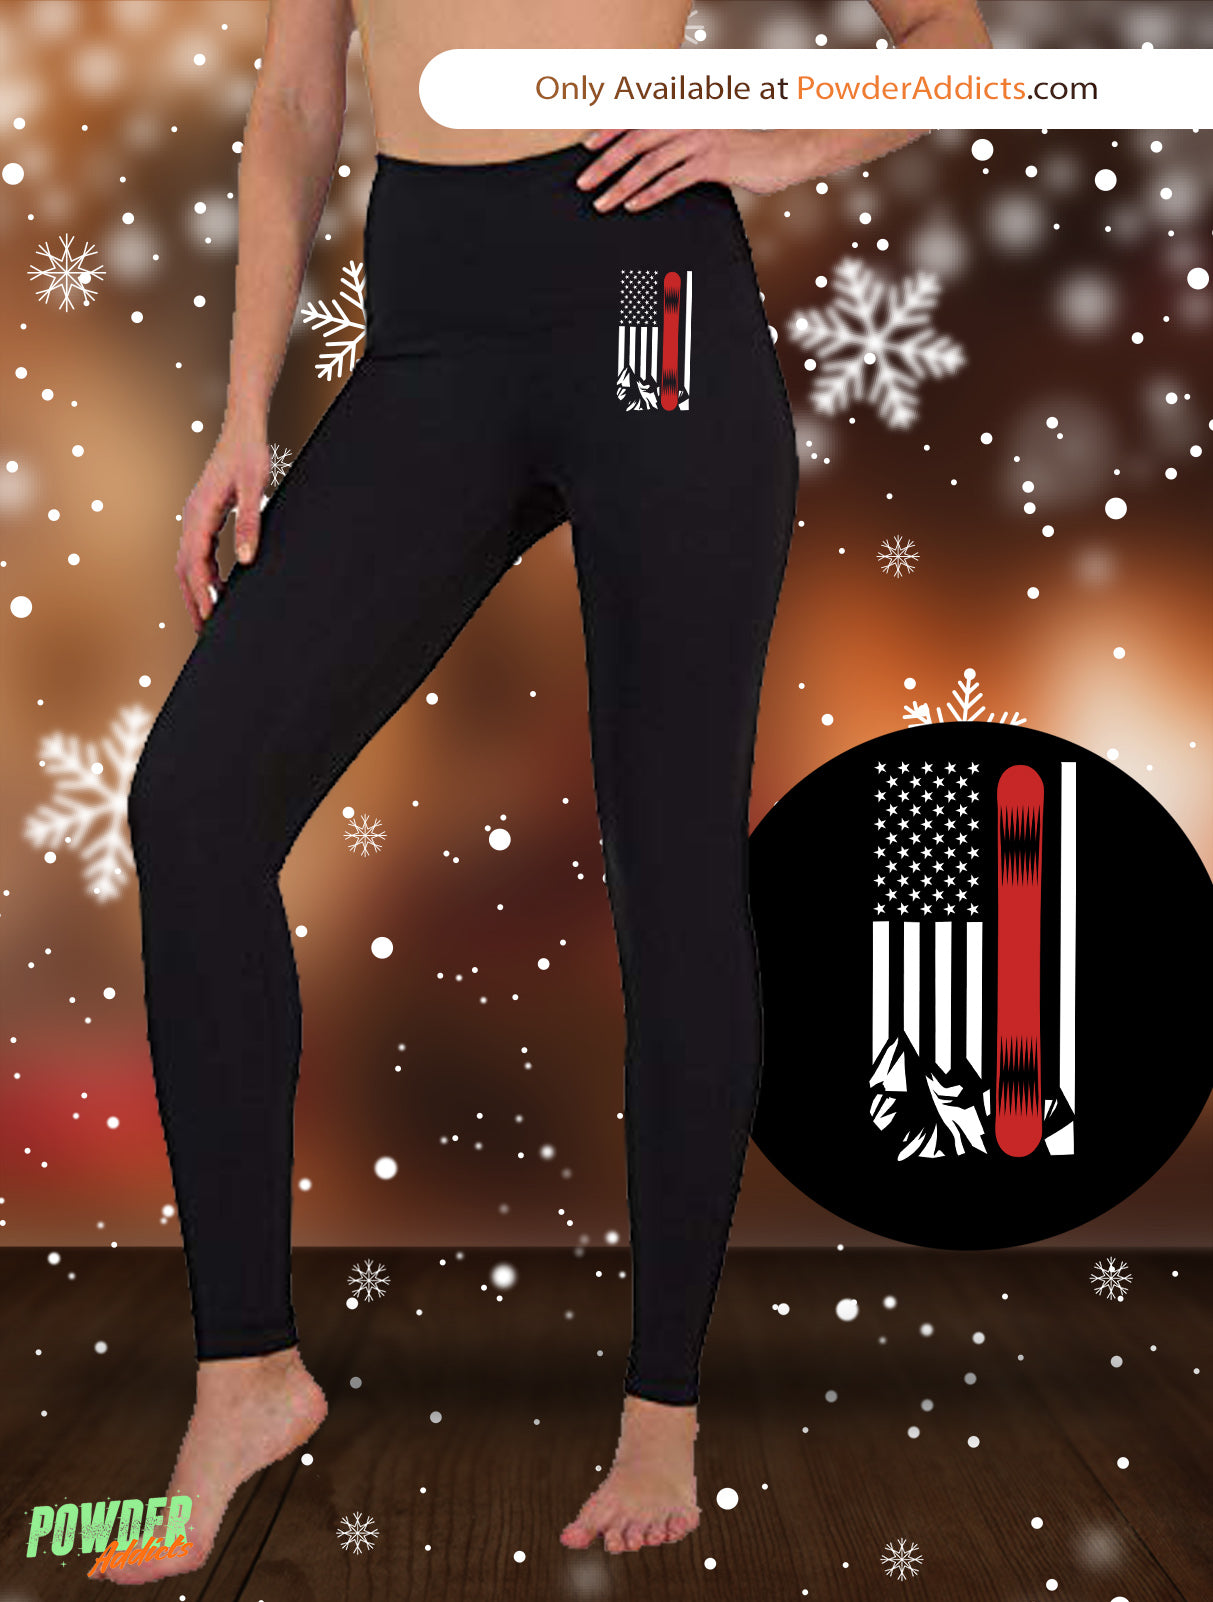 USA Snowboard Flag Thin Red Line Women's Embroidered Leggings - Powderaddicts